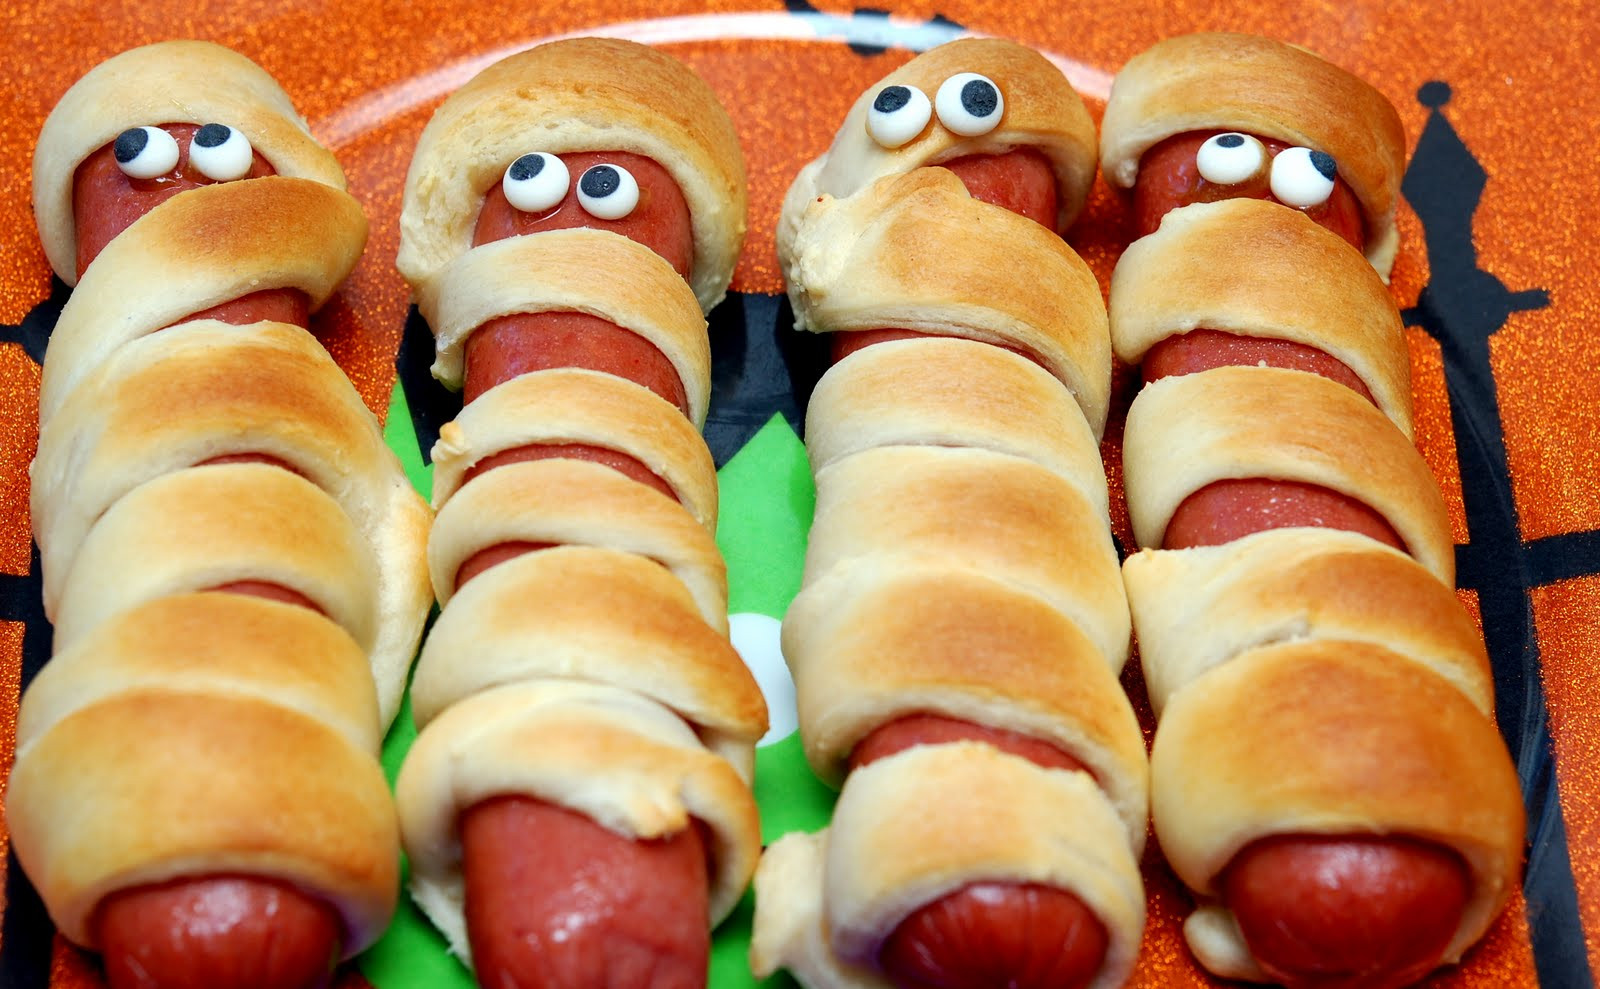 Halloween Hot Dogs Mummy
 MUMMY HOT DOGS FOR DINNER Hugs and Cookies XOXO